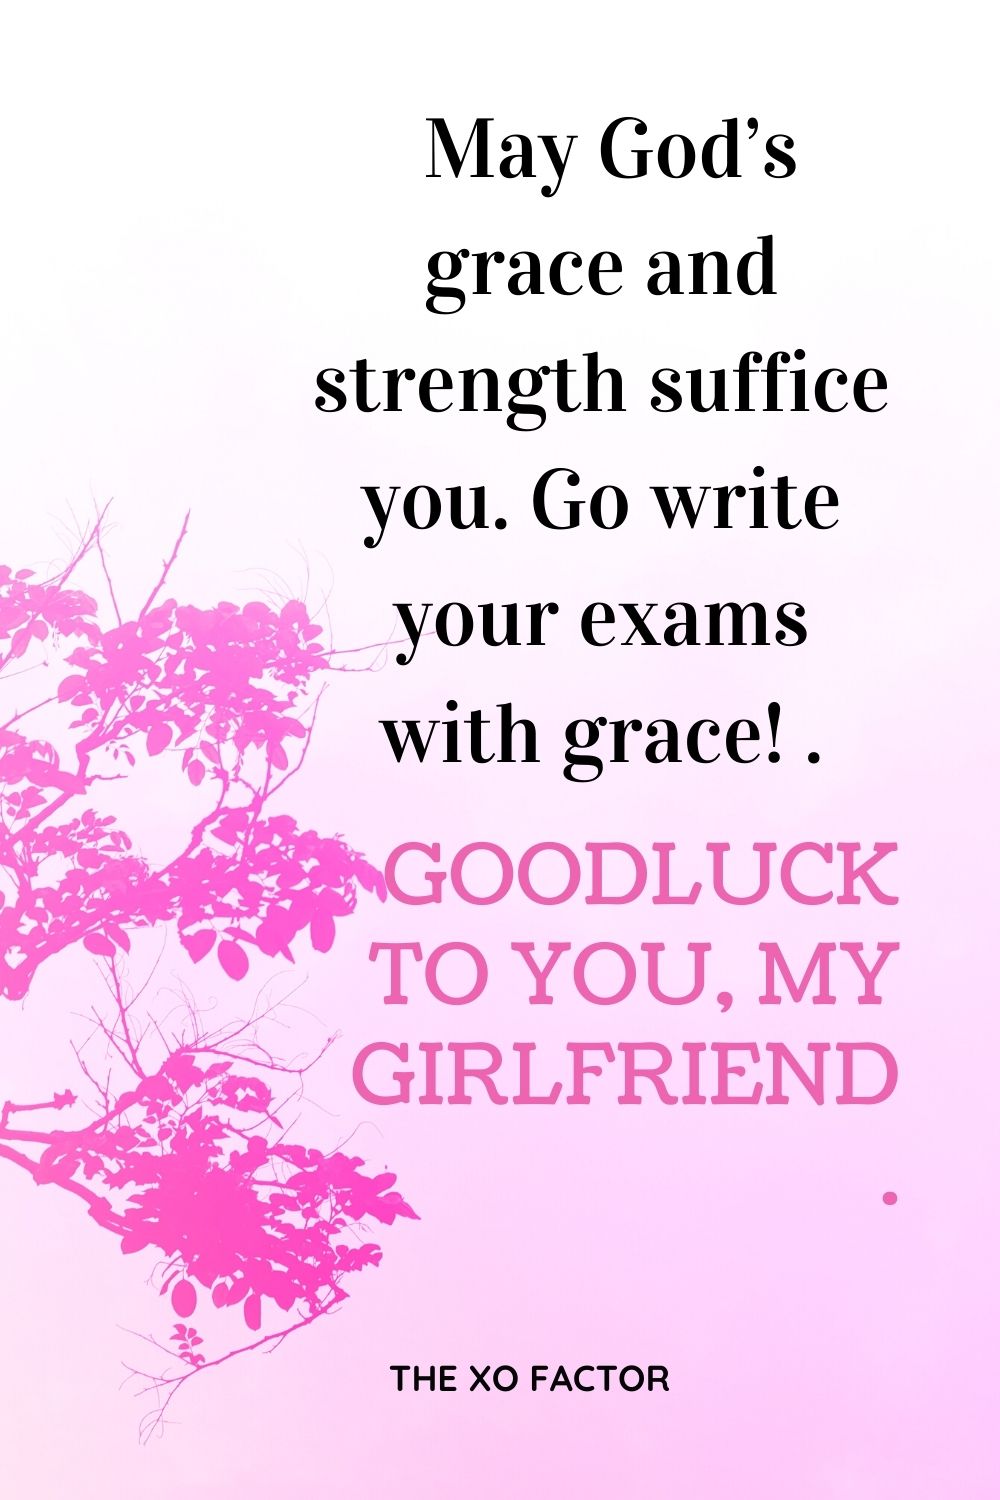 May God’s grace and strength suffice you. Go write your exams with grace! Good luck to you, my girlfriend.